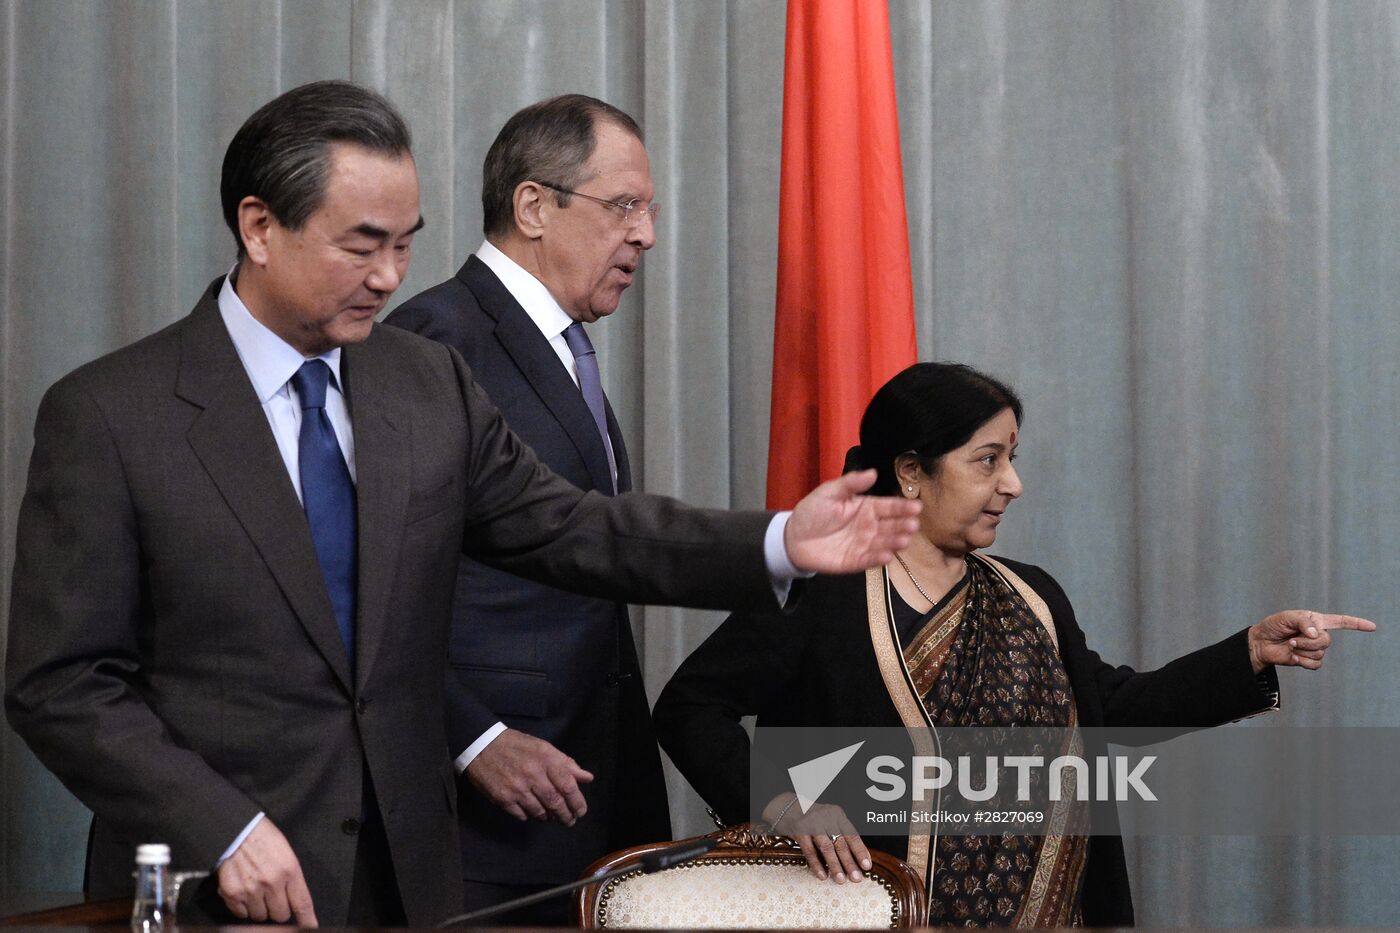 Plenary meeting of Russian, Indian and Chinese (RIC) foreign ministers